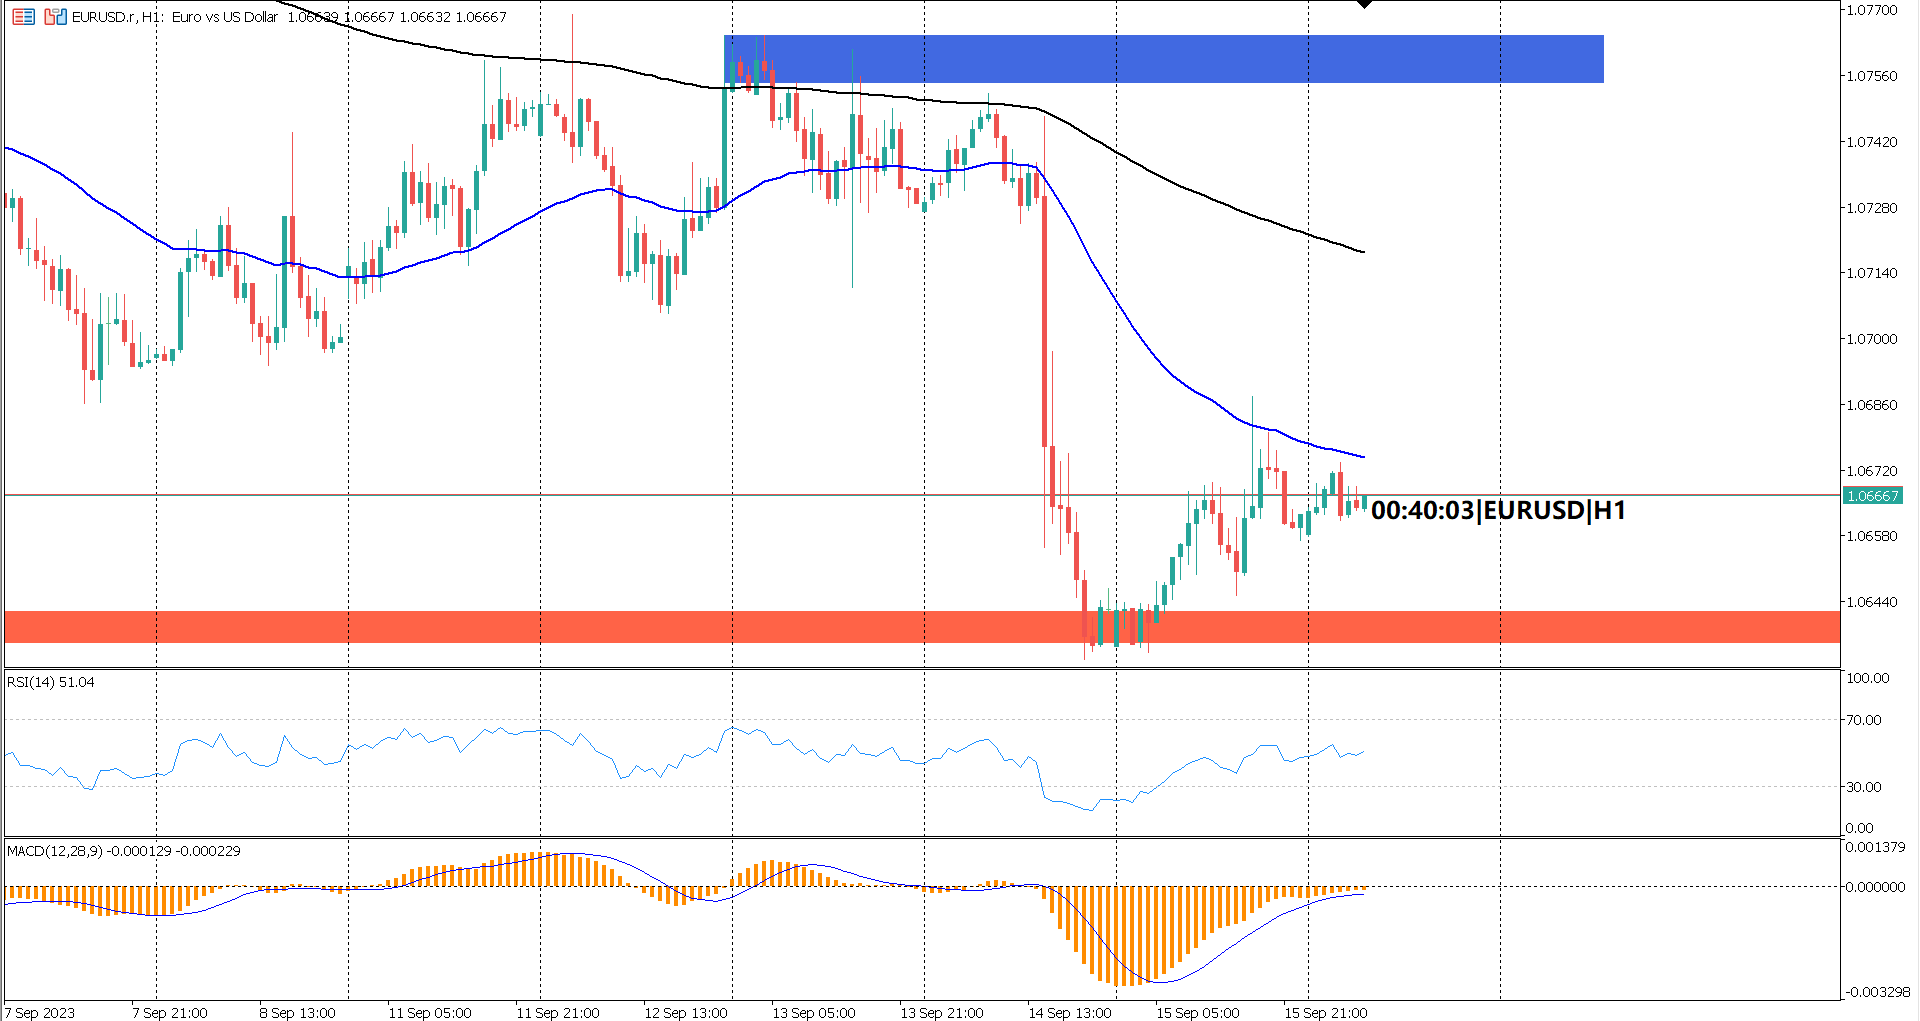 EURUSD is likely to test the critical key level support for the second time